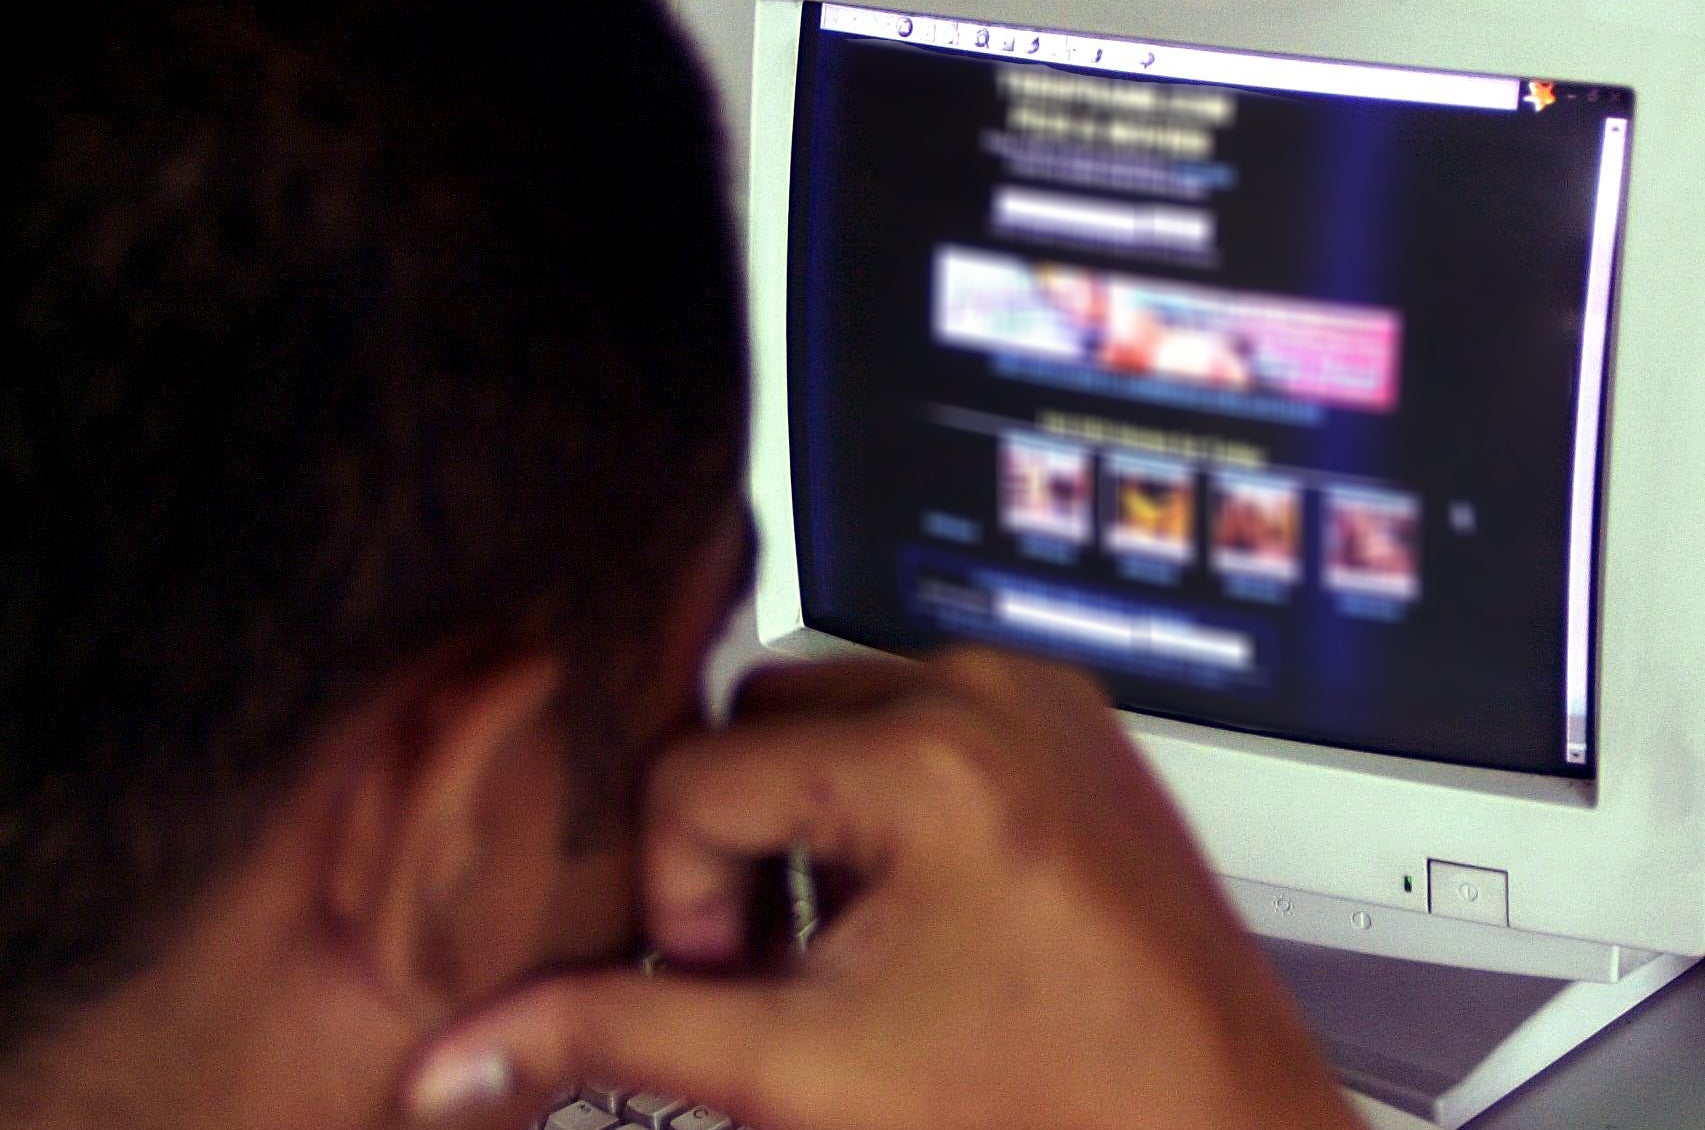 Porn viewers could all be added to a country-wide database ...